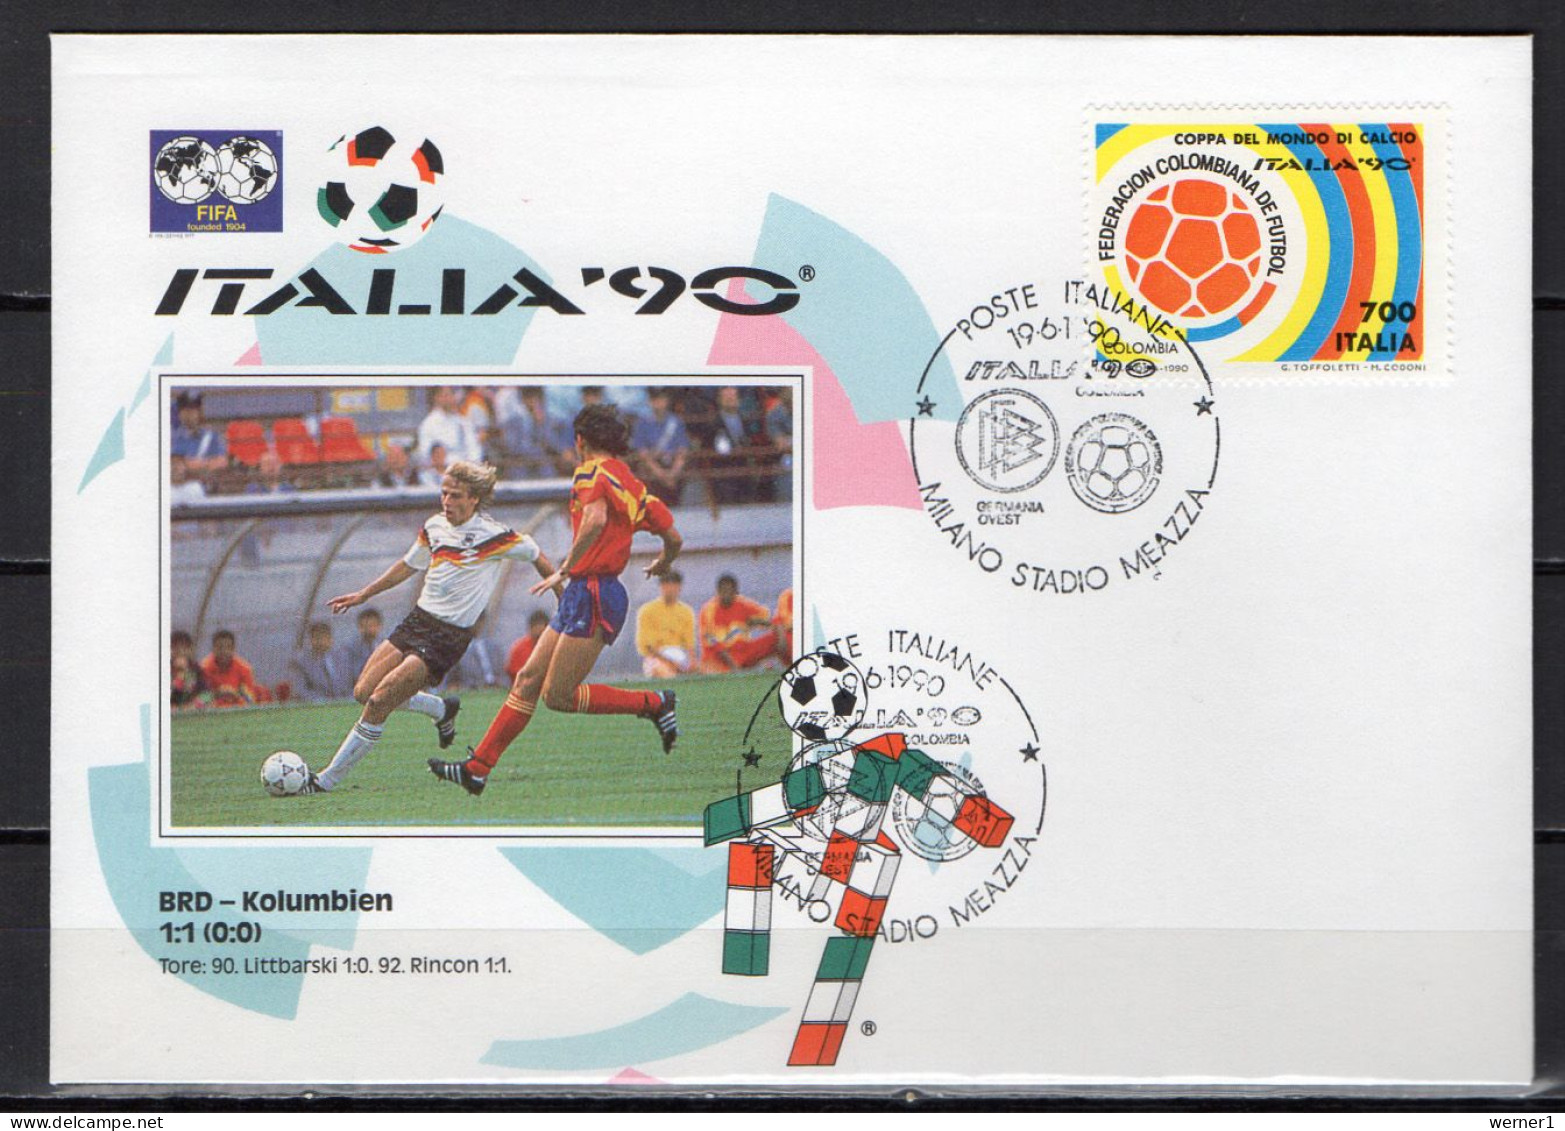 Italy 1990 Football Soccer World Cup Commemorative Cover Final Match Germany - Colombia 1 : 1 - 1990 – Italie